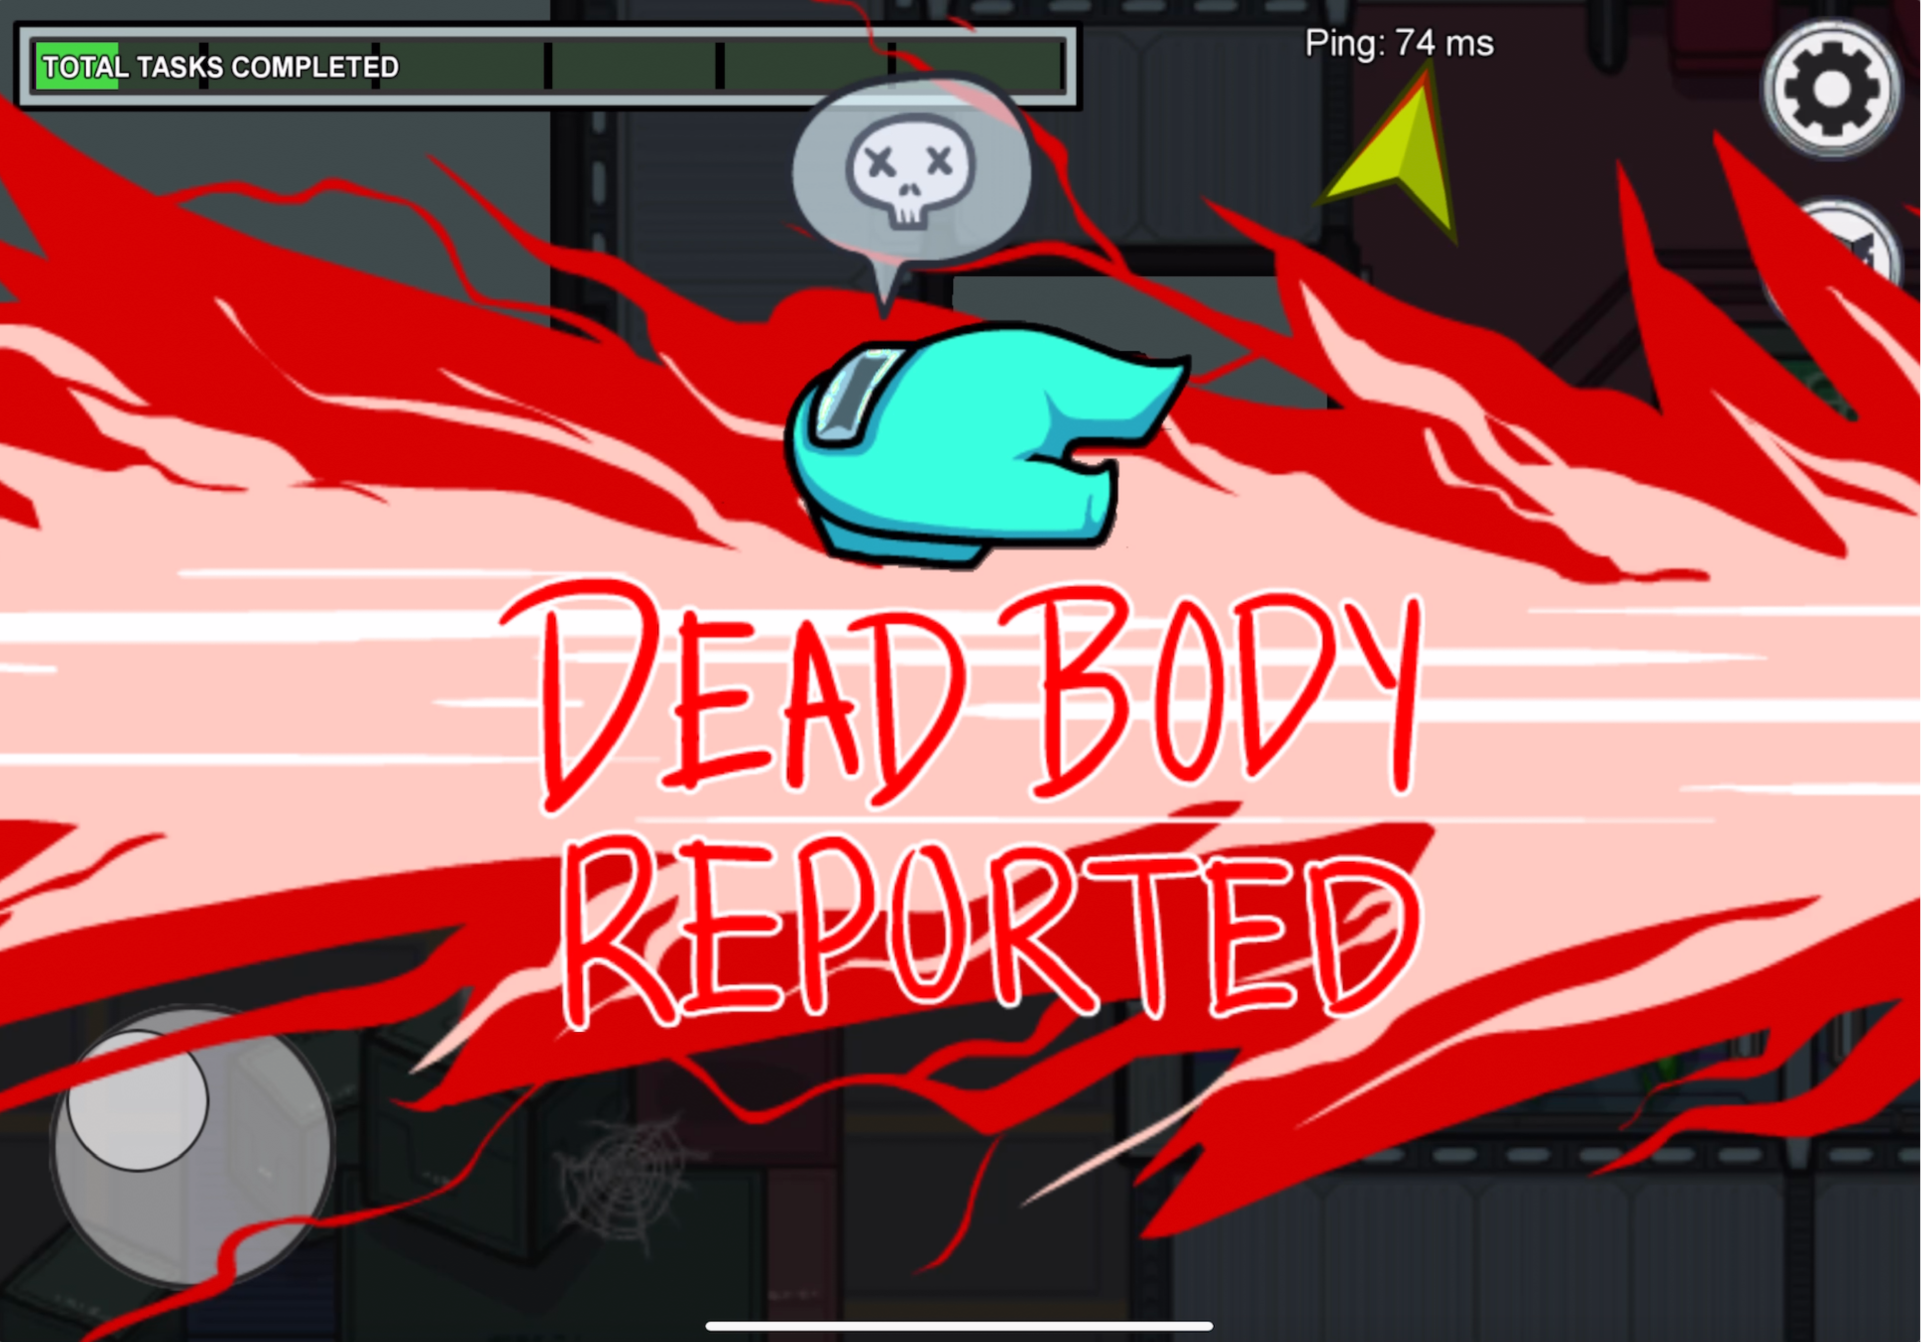 Dead Body Reported gameplay screen from Among Us